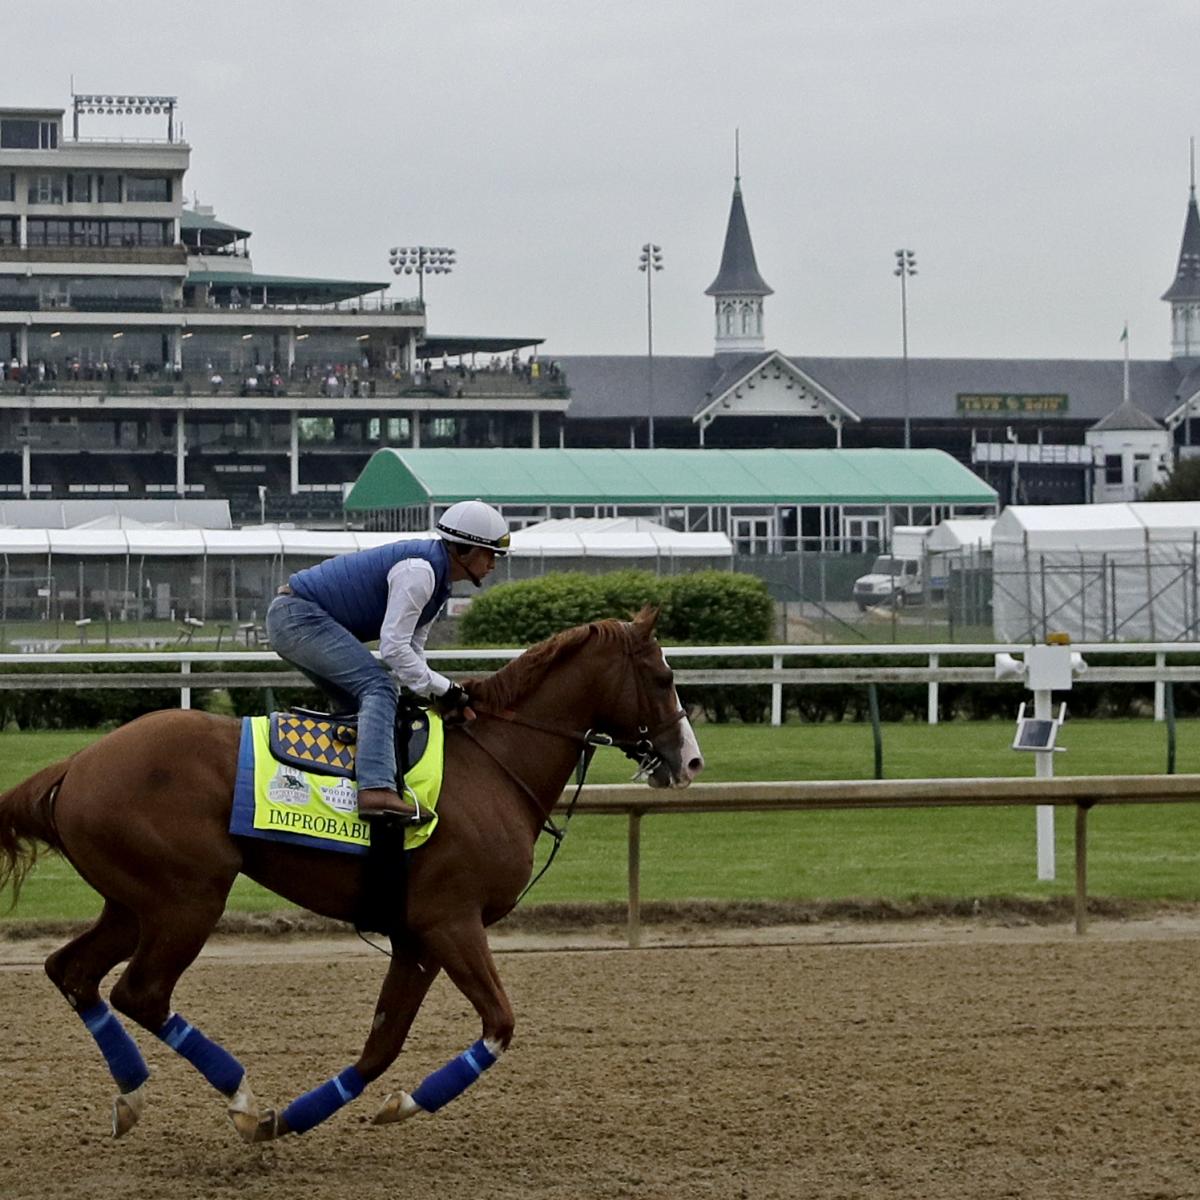 Kentucky Derby 2019 Latest Odds, Lineup Info and Top Horses for